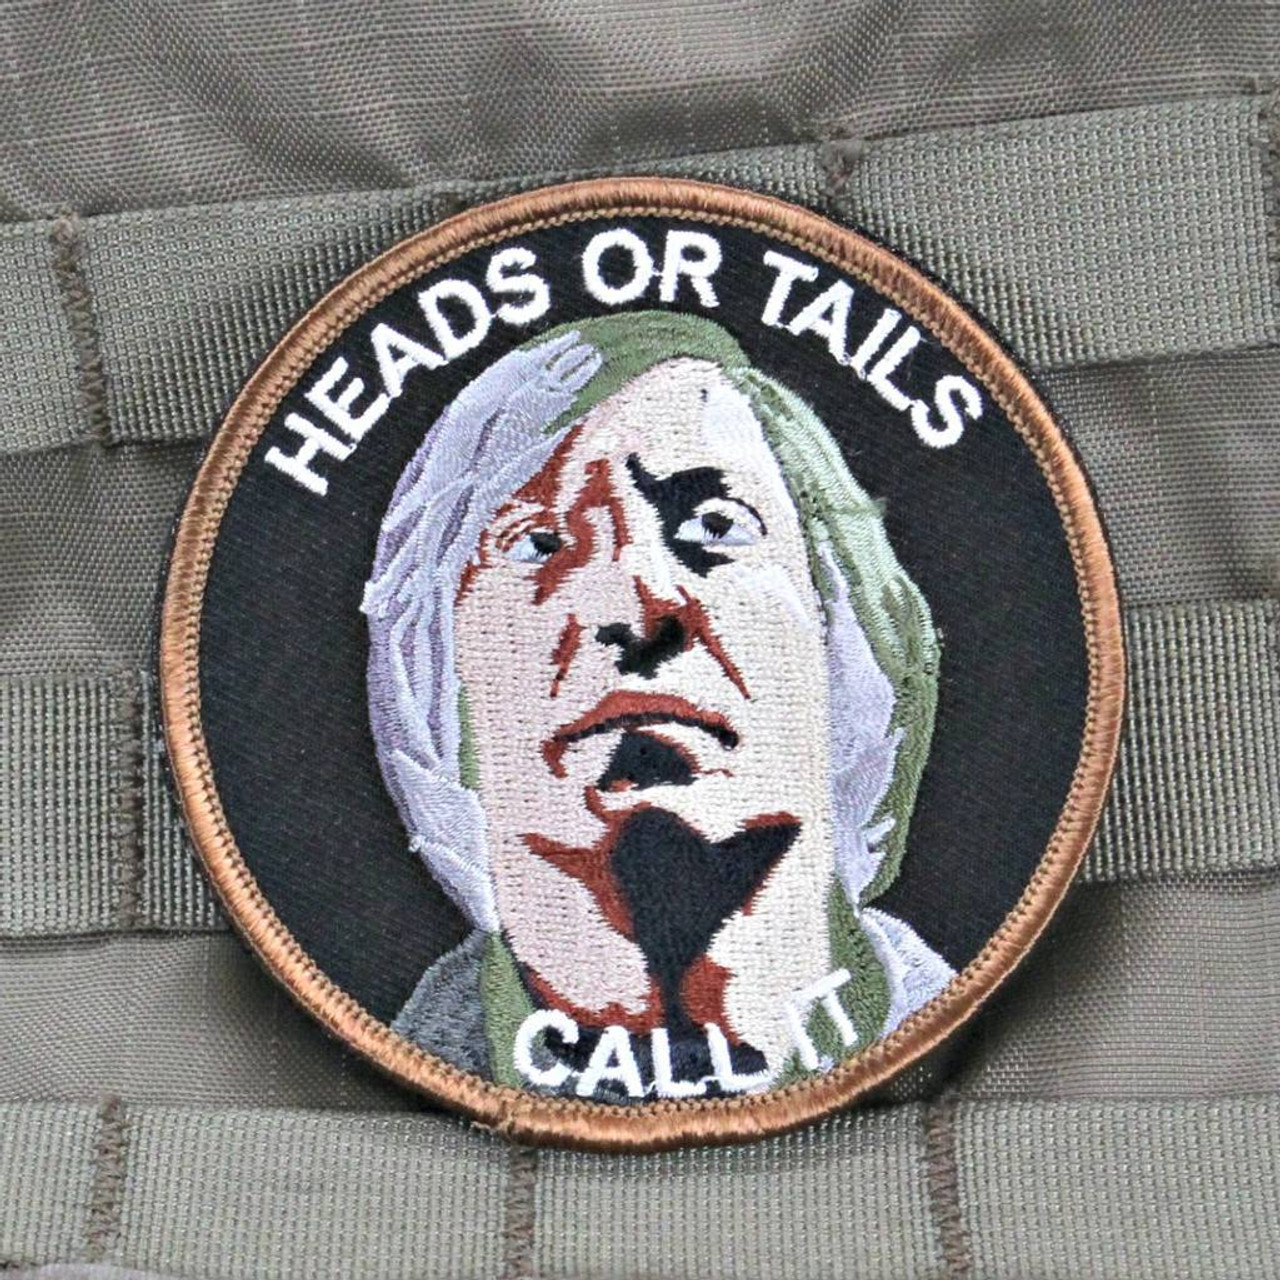 Heads or Tails No Country Morale Patch - OC Tactical